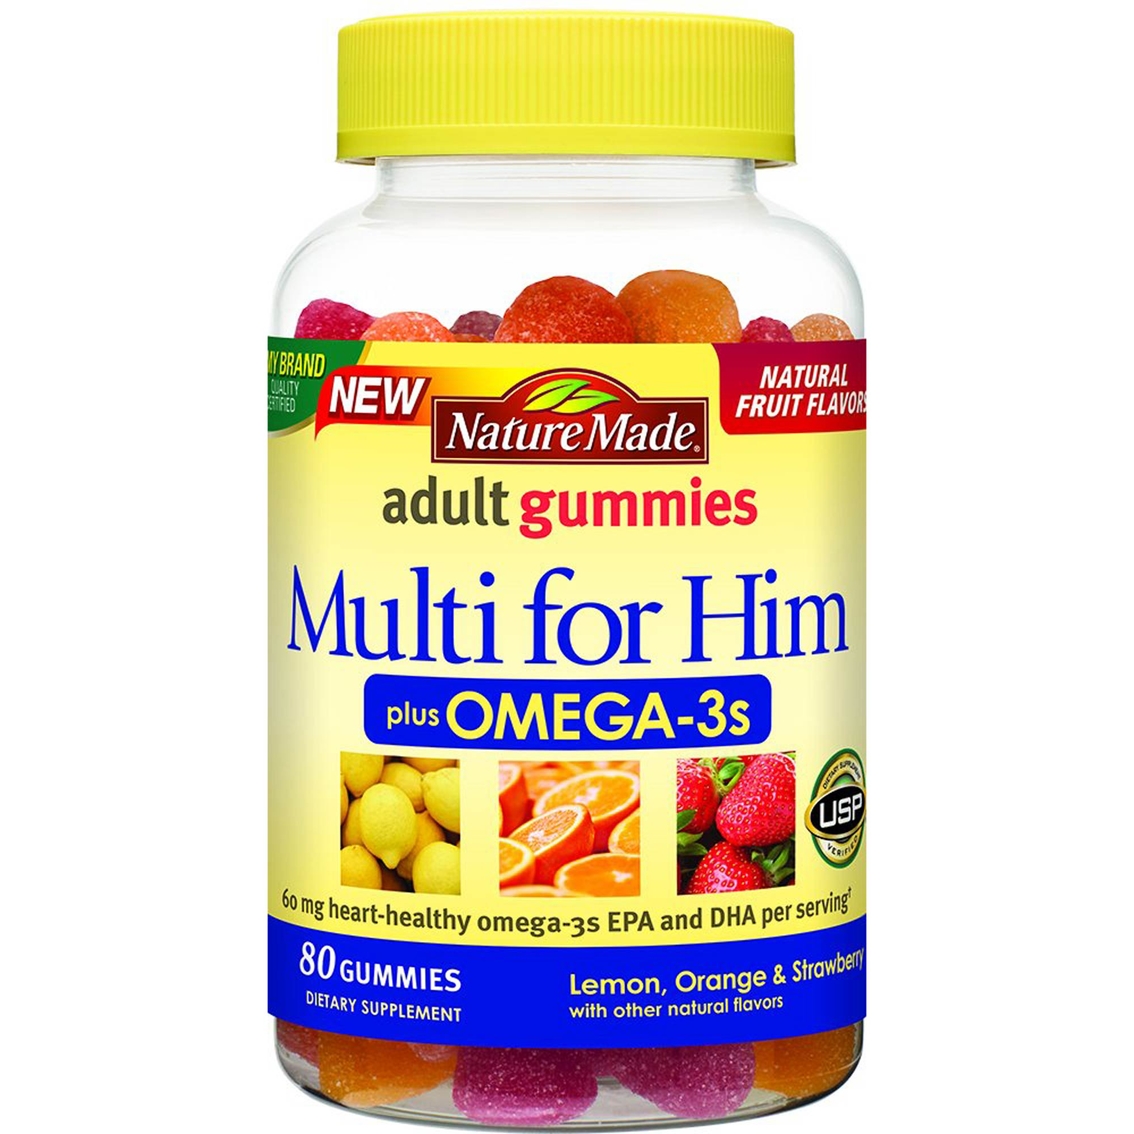 Nature Made Multivitamin and Omega Gummies for Him 80 ct. - Image 1 of 2